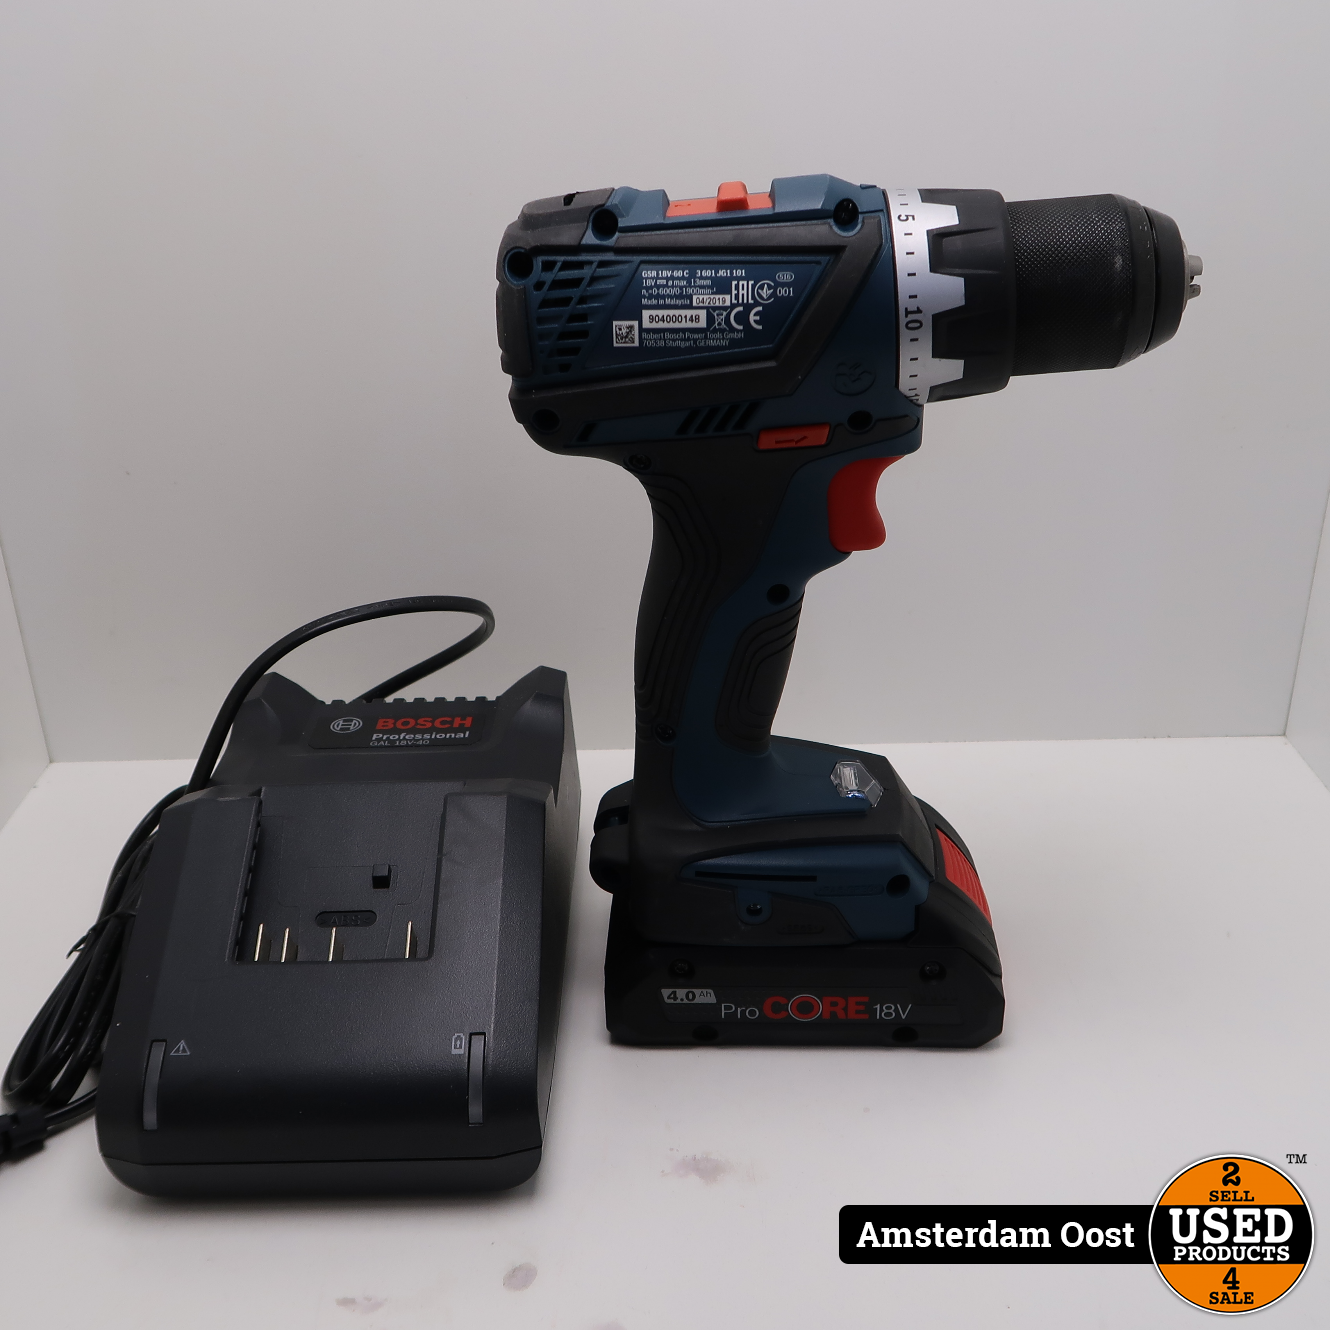 Bosch GSR 18V-60 Accuboormachine | in Nette Staat - Used Oost